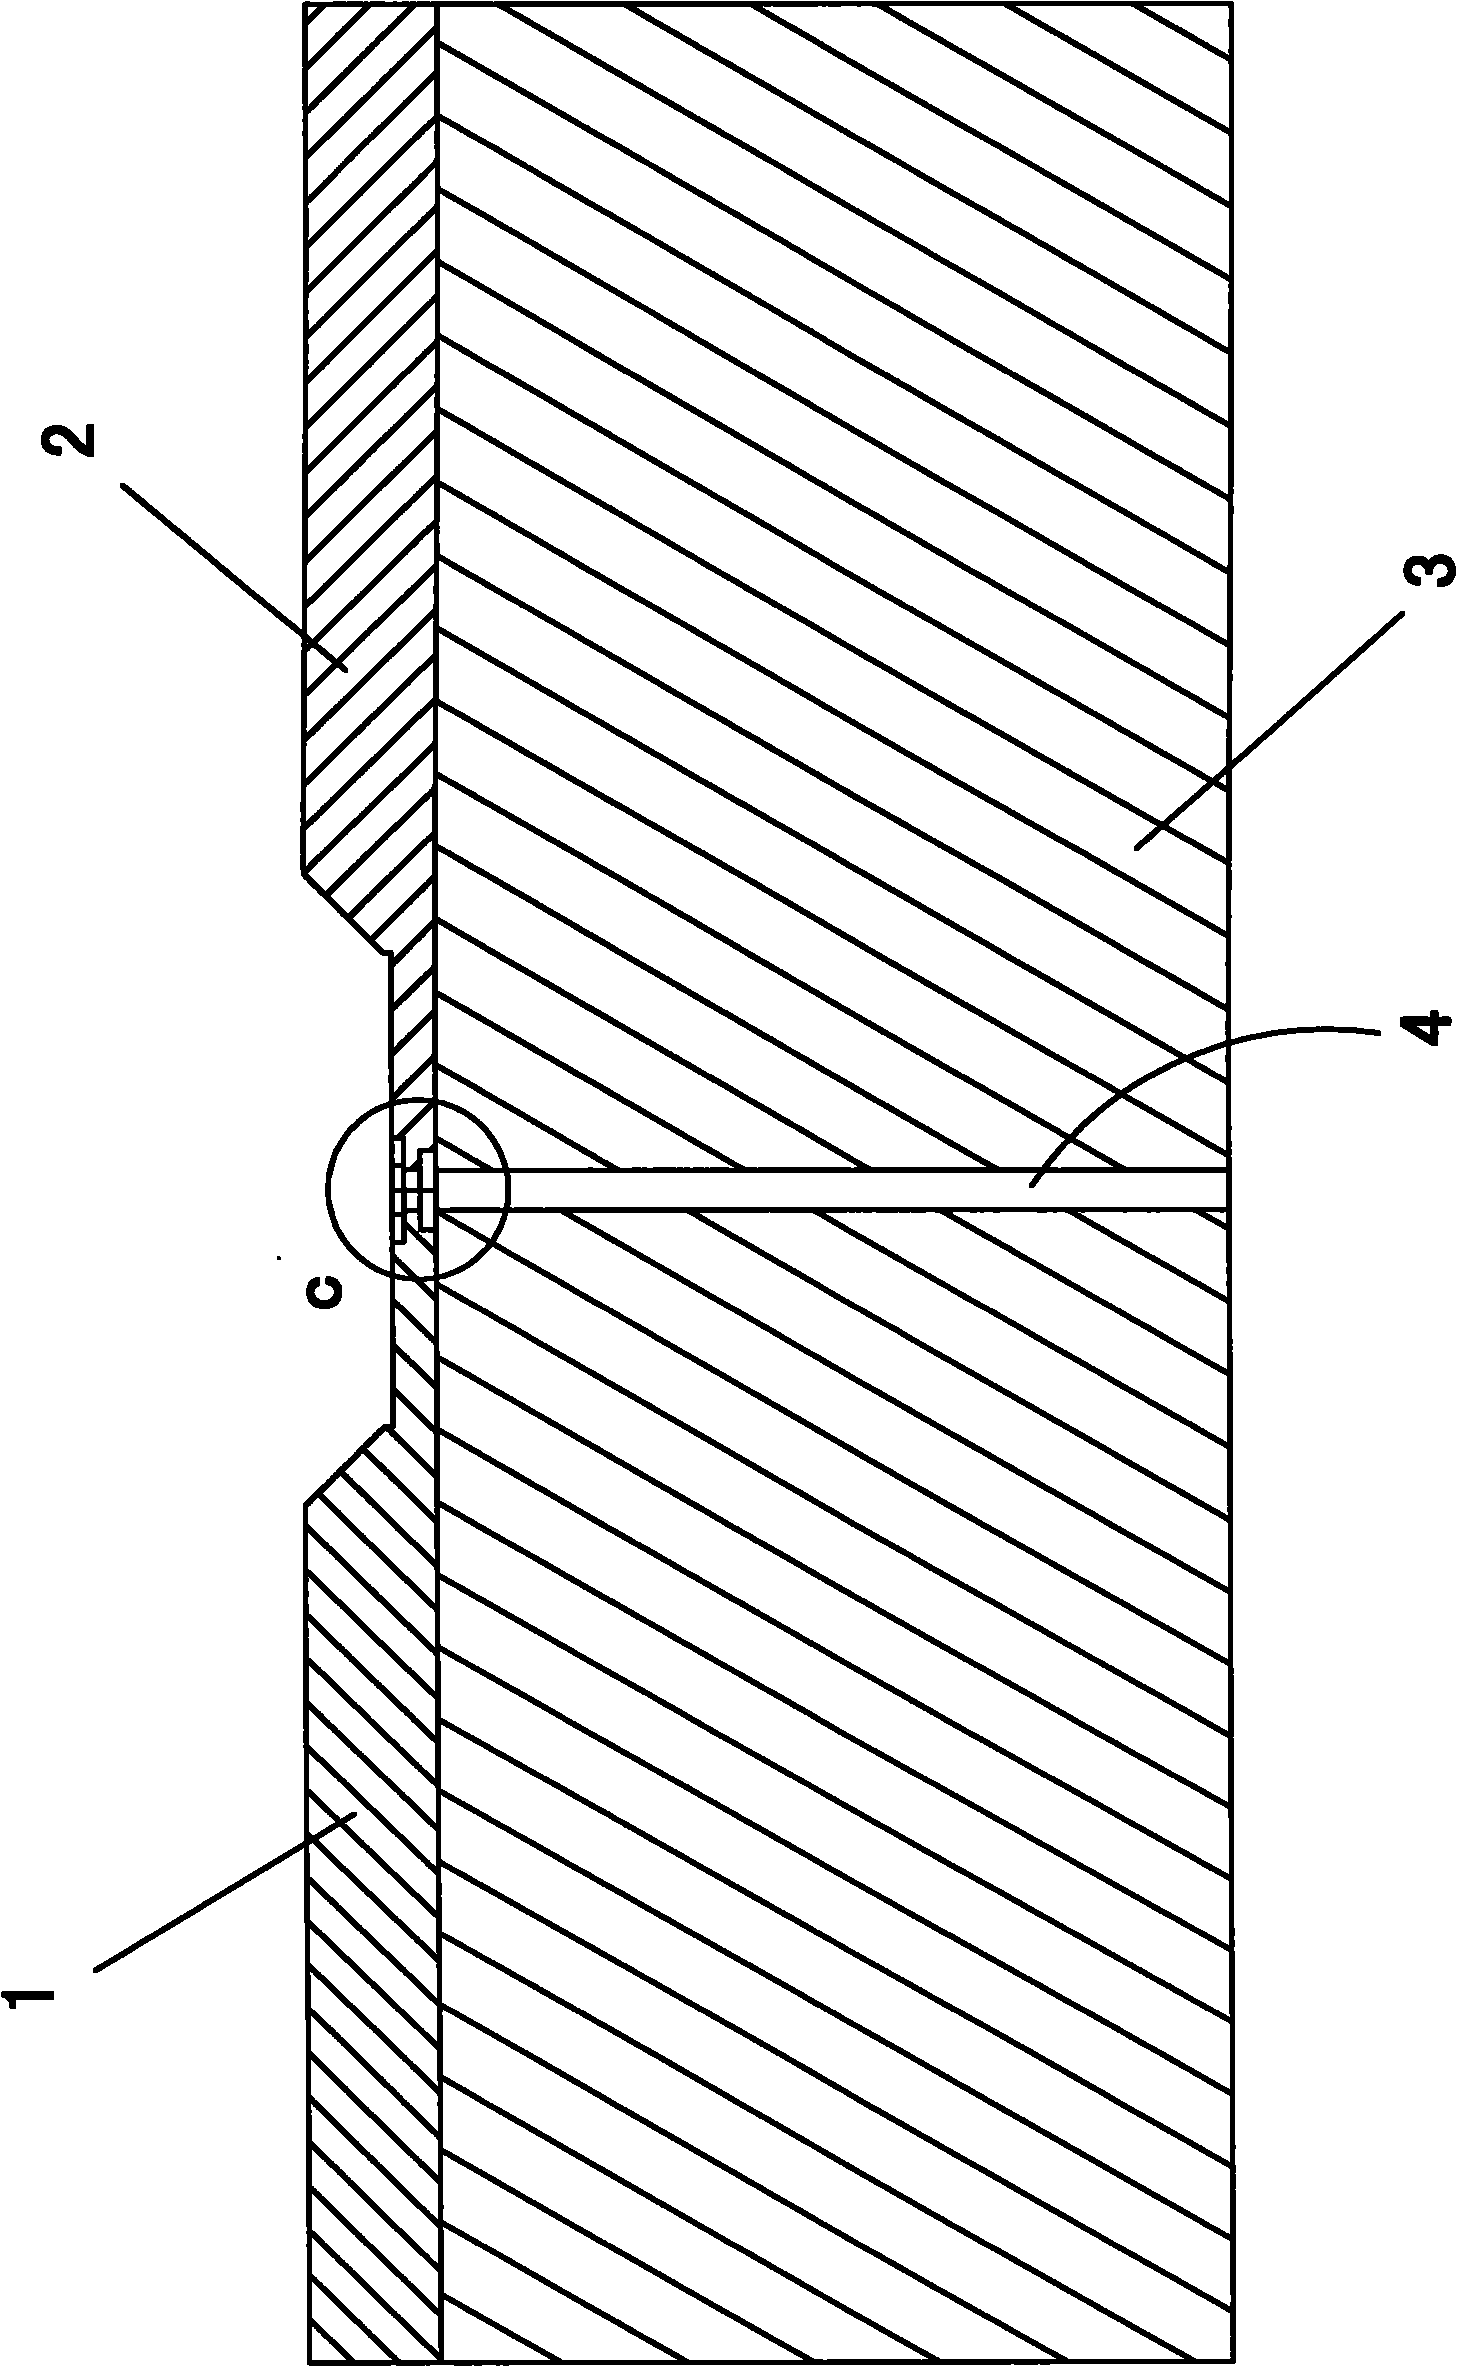 Method for sticking massively produced simple lenses and metal brackets